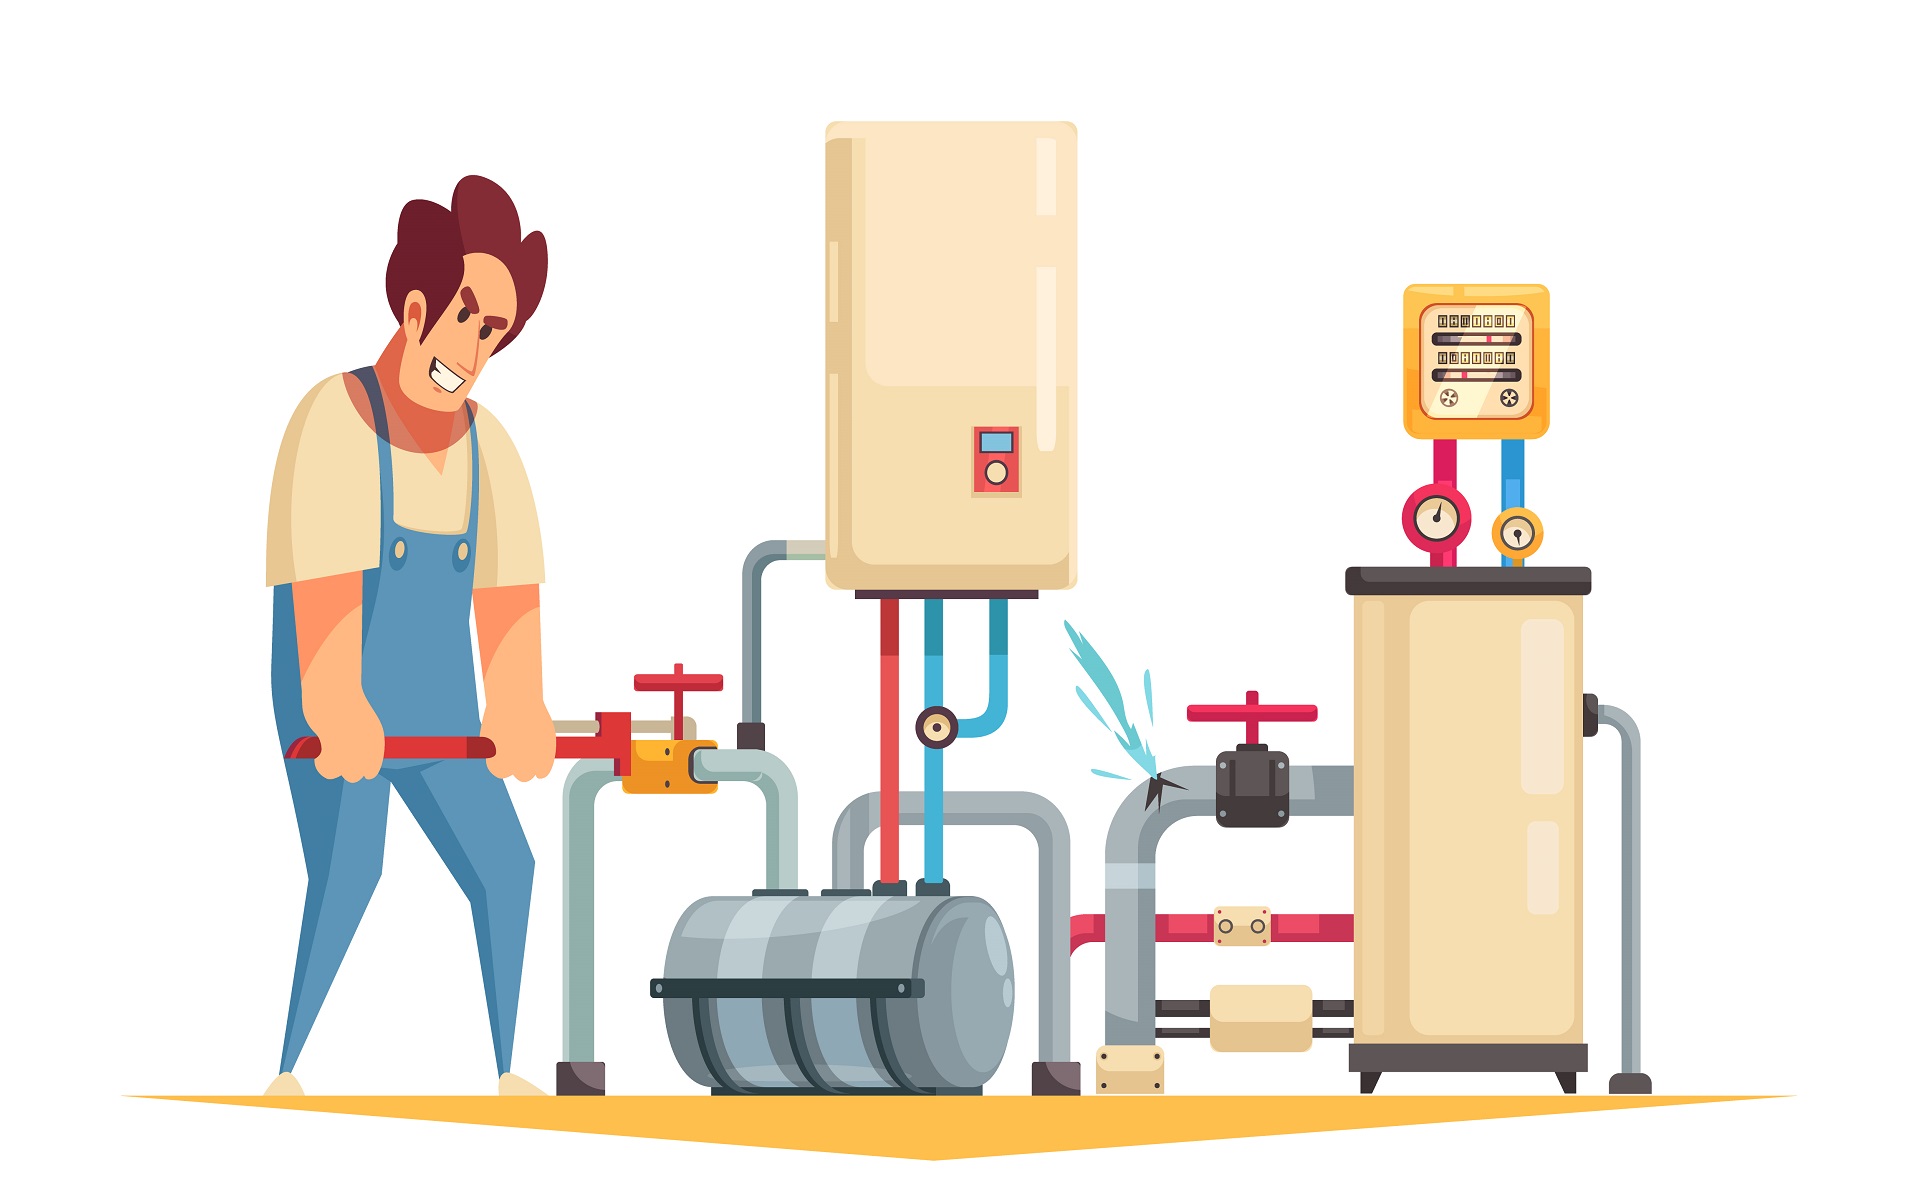 Illustration of a plumber fixing a leak in a plumbing system